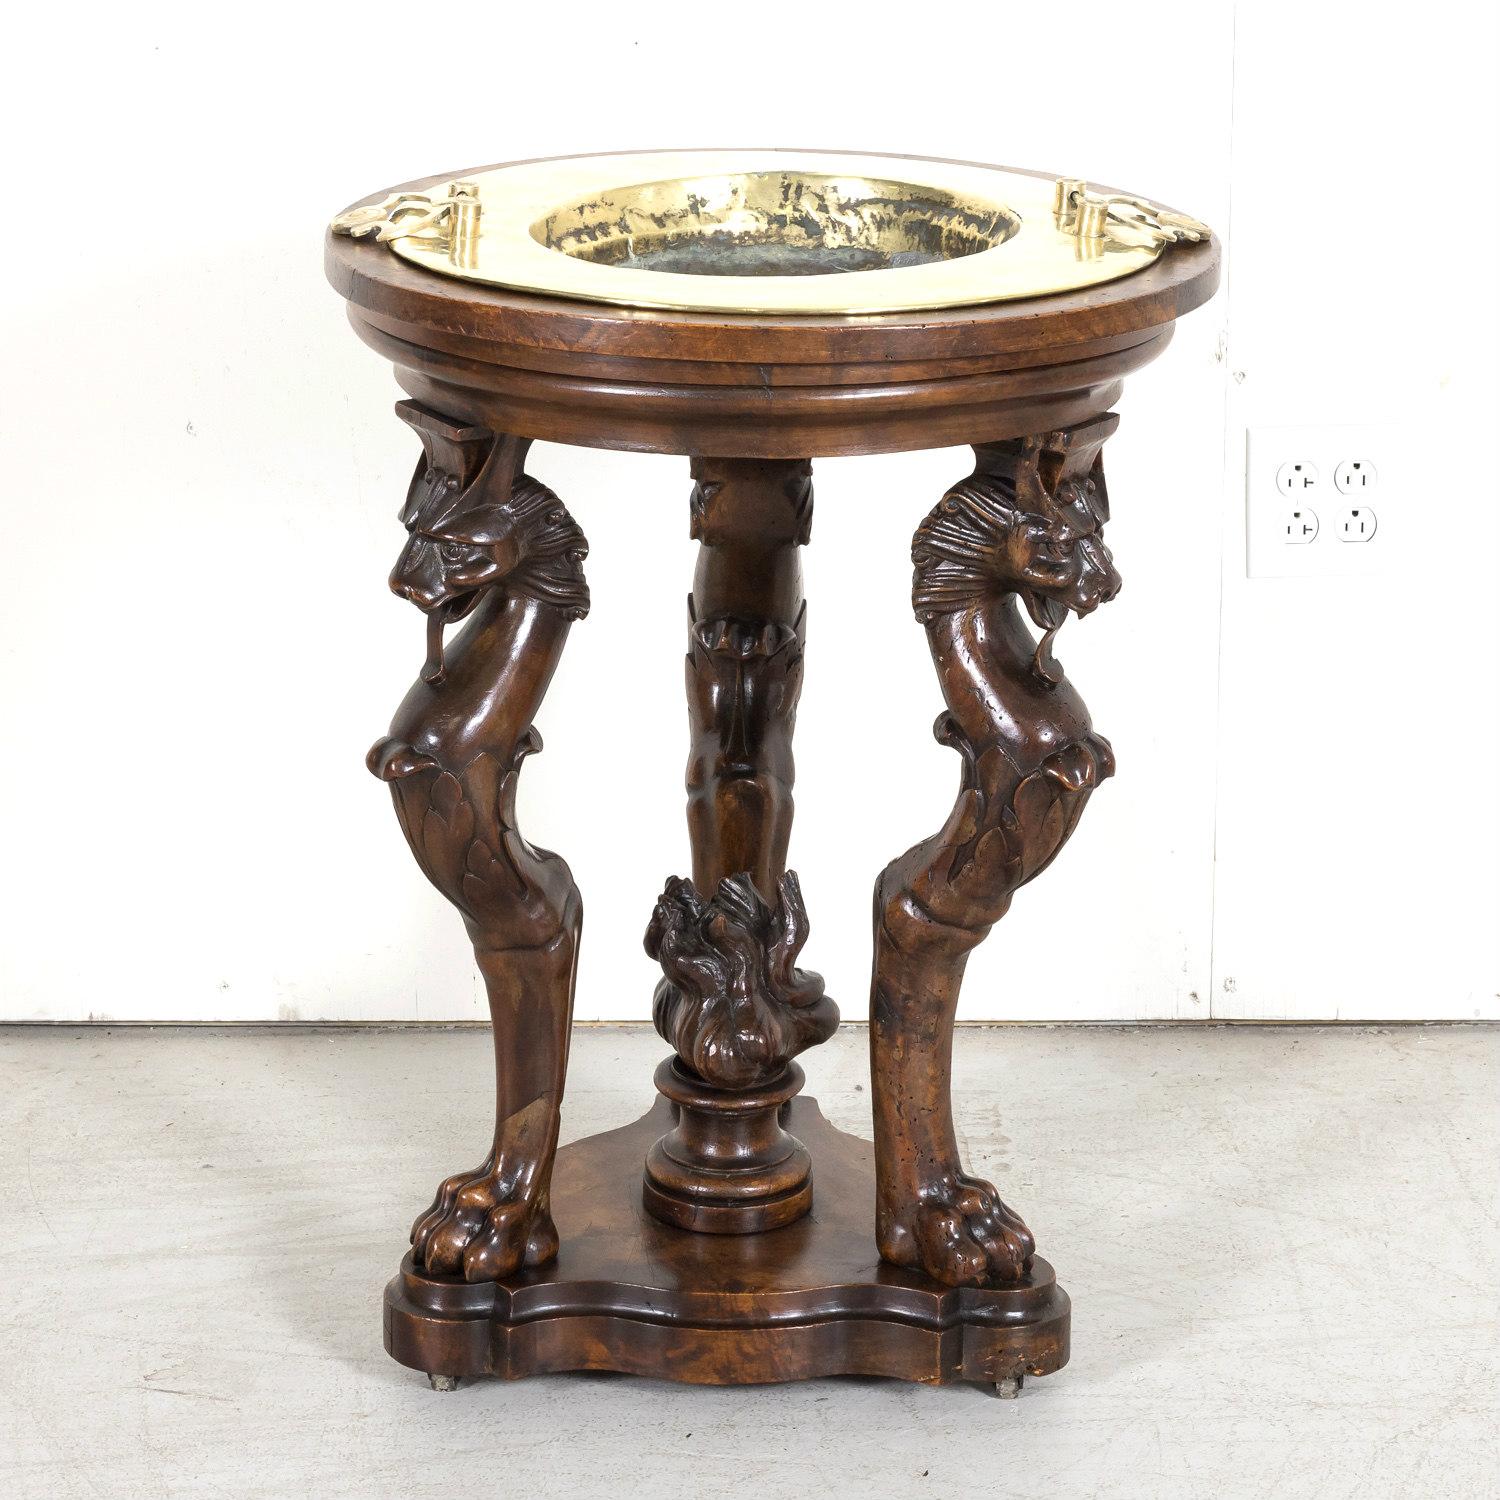 A very fine early 19th century French Restauration period tripod brazier or hand warmer handcrafted of walnut by skilled artisans in Lyon, circa 1820s. This elegant round table features a circular top having the original removable twin handled brass